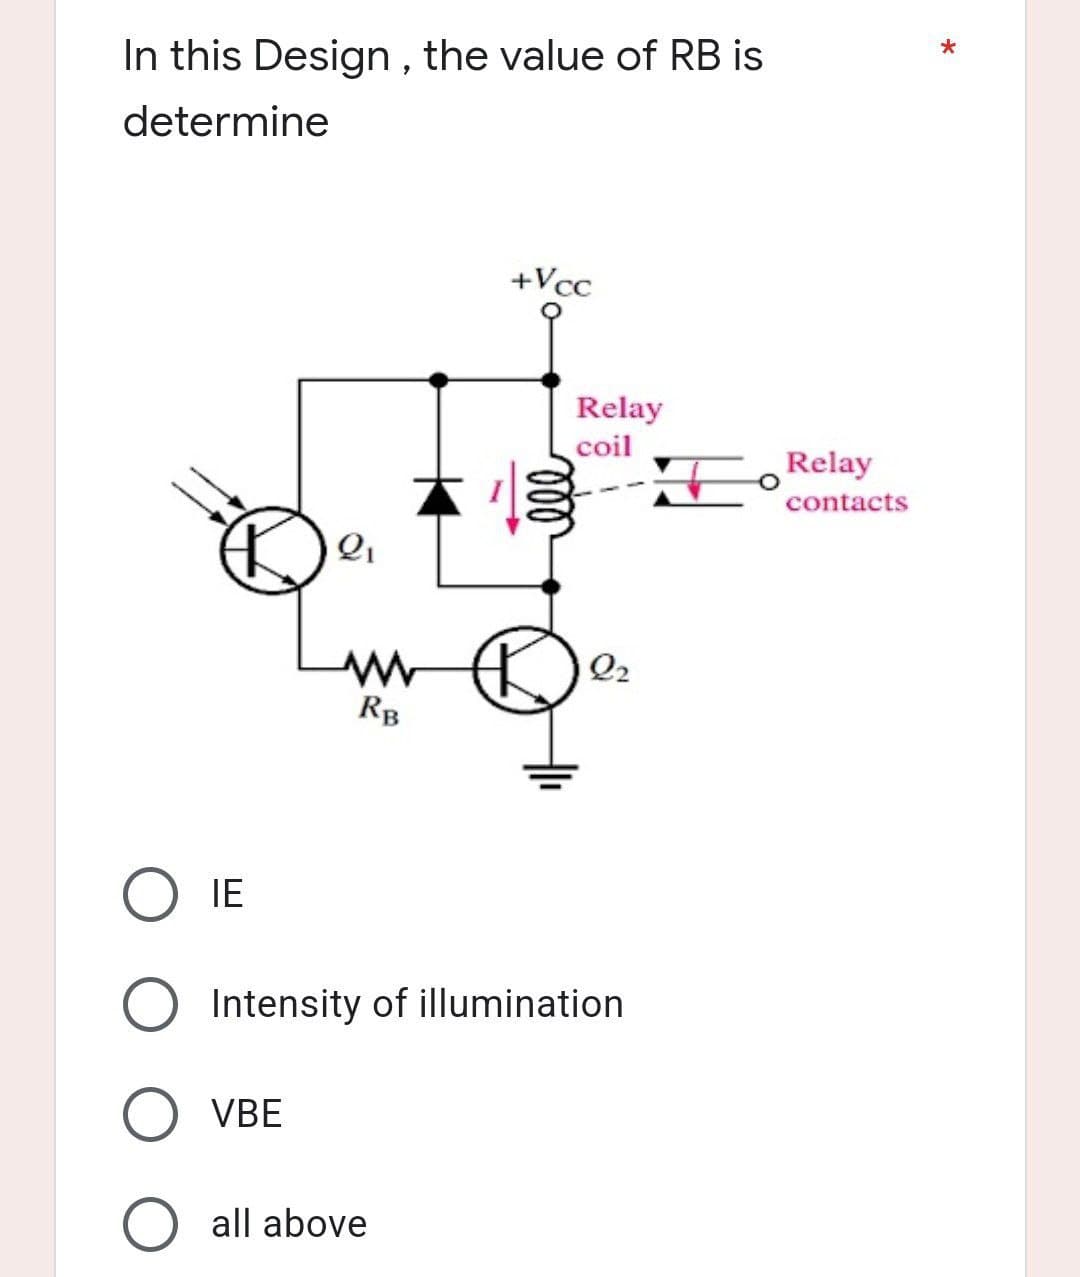 In this Design, the value of RB is
determine
+Vcc
2₁
O VBE
Relay
coil
22
ww
RB
IE
Intensity of illumination
all above
voo
++
Relay
contacts